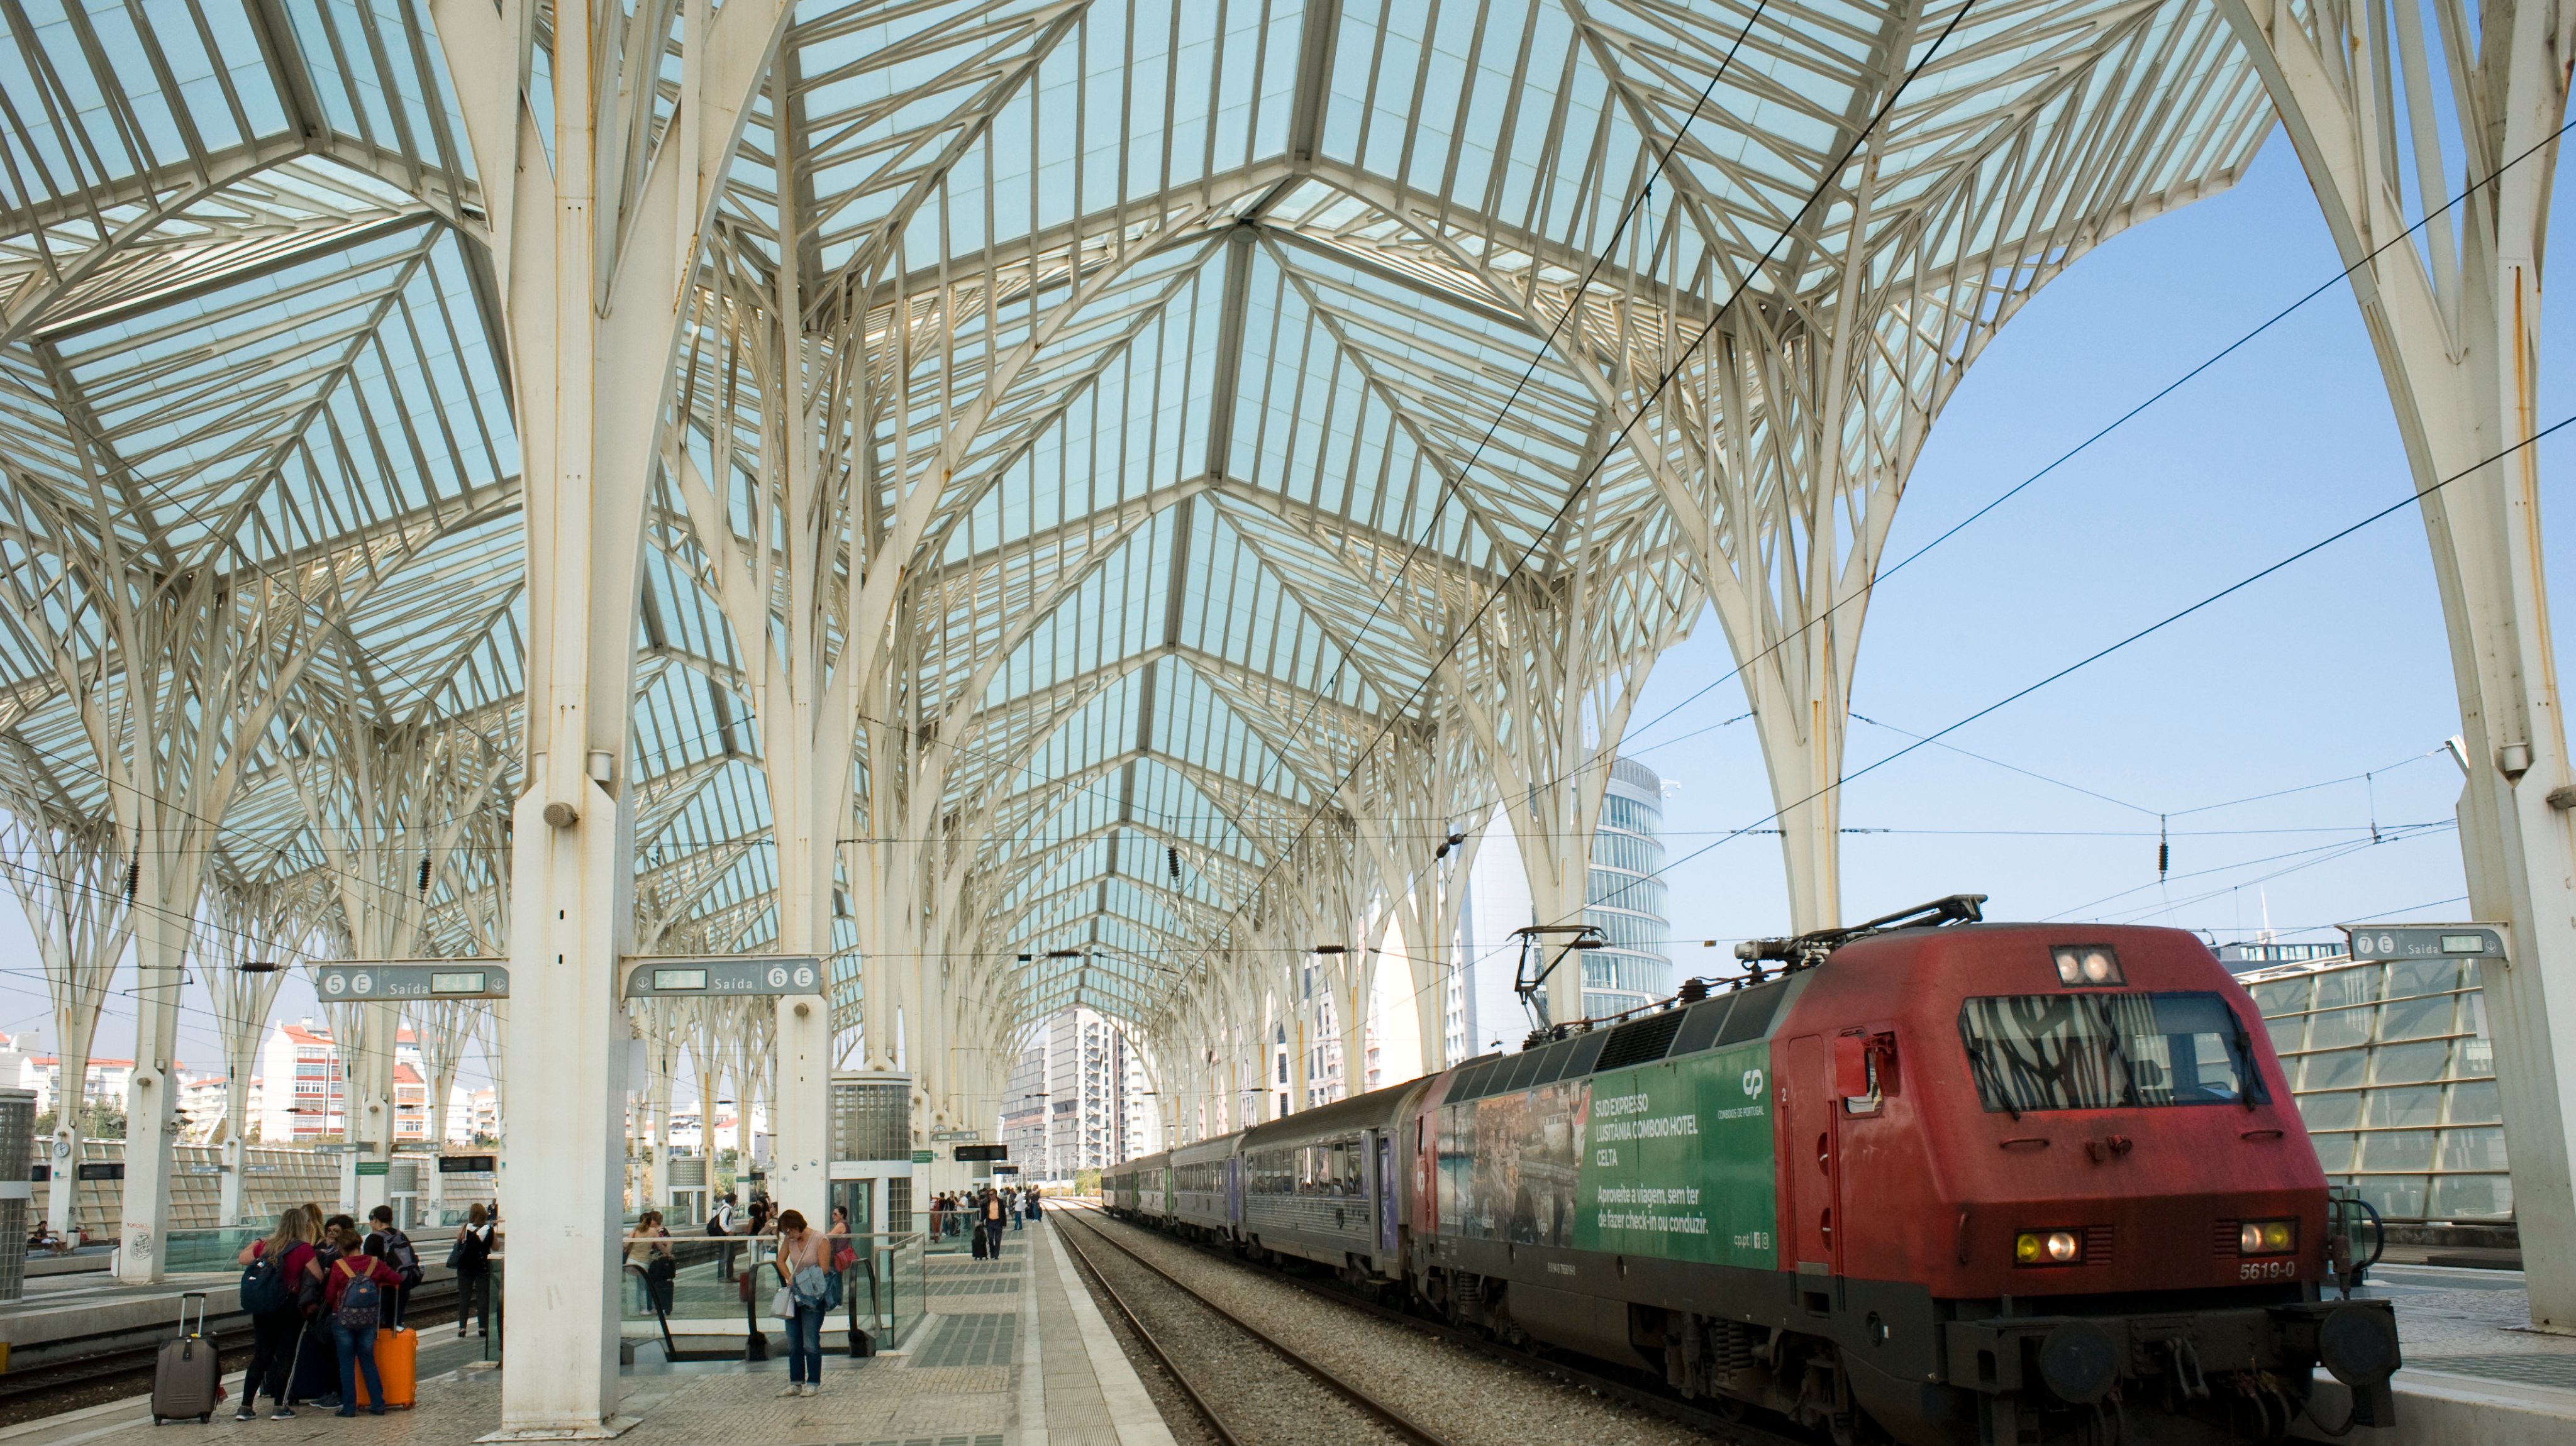 A view of the cathedral-like roof of Lisbon Oriente Station